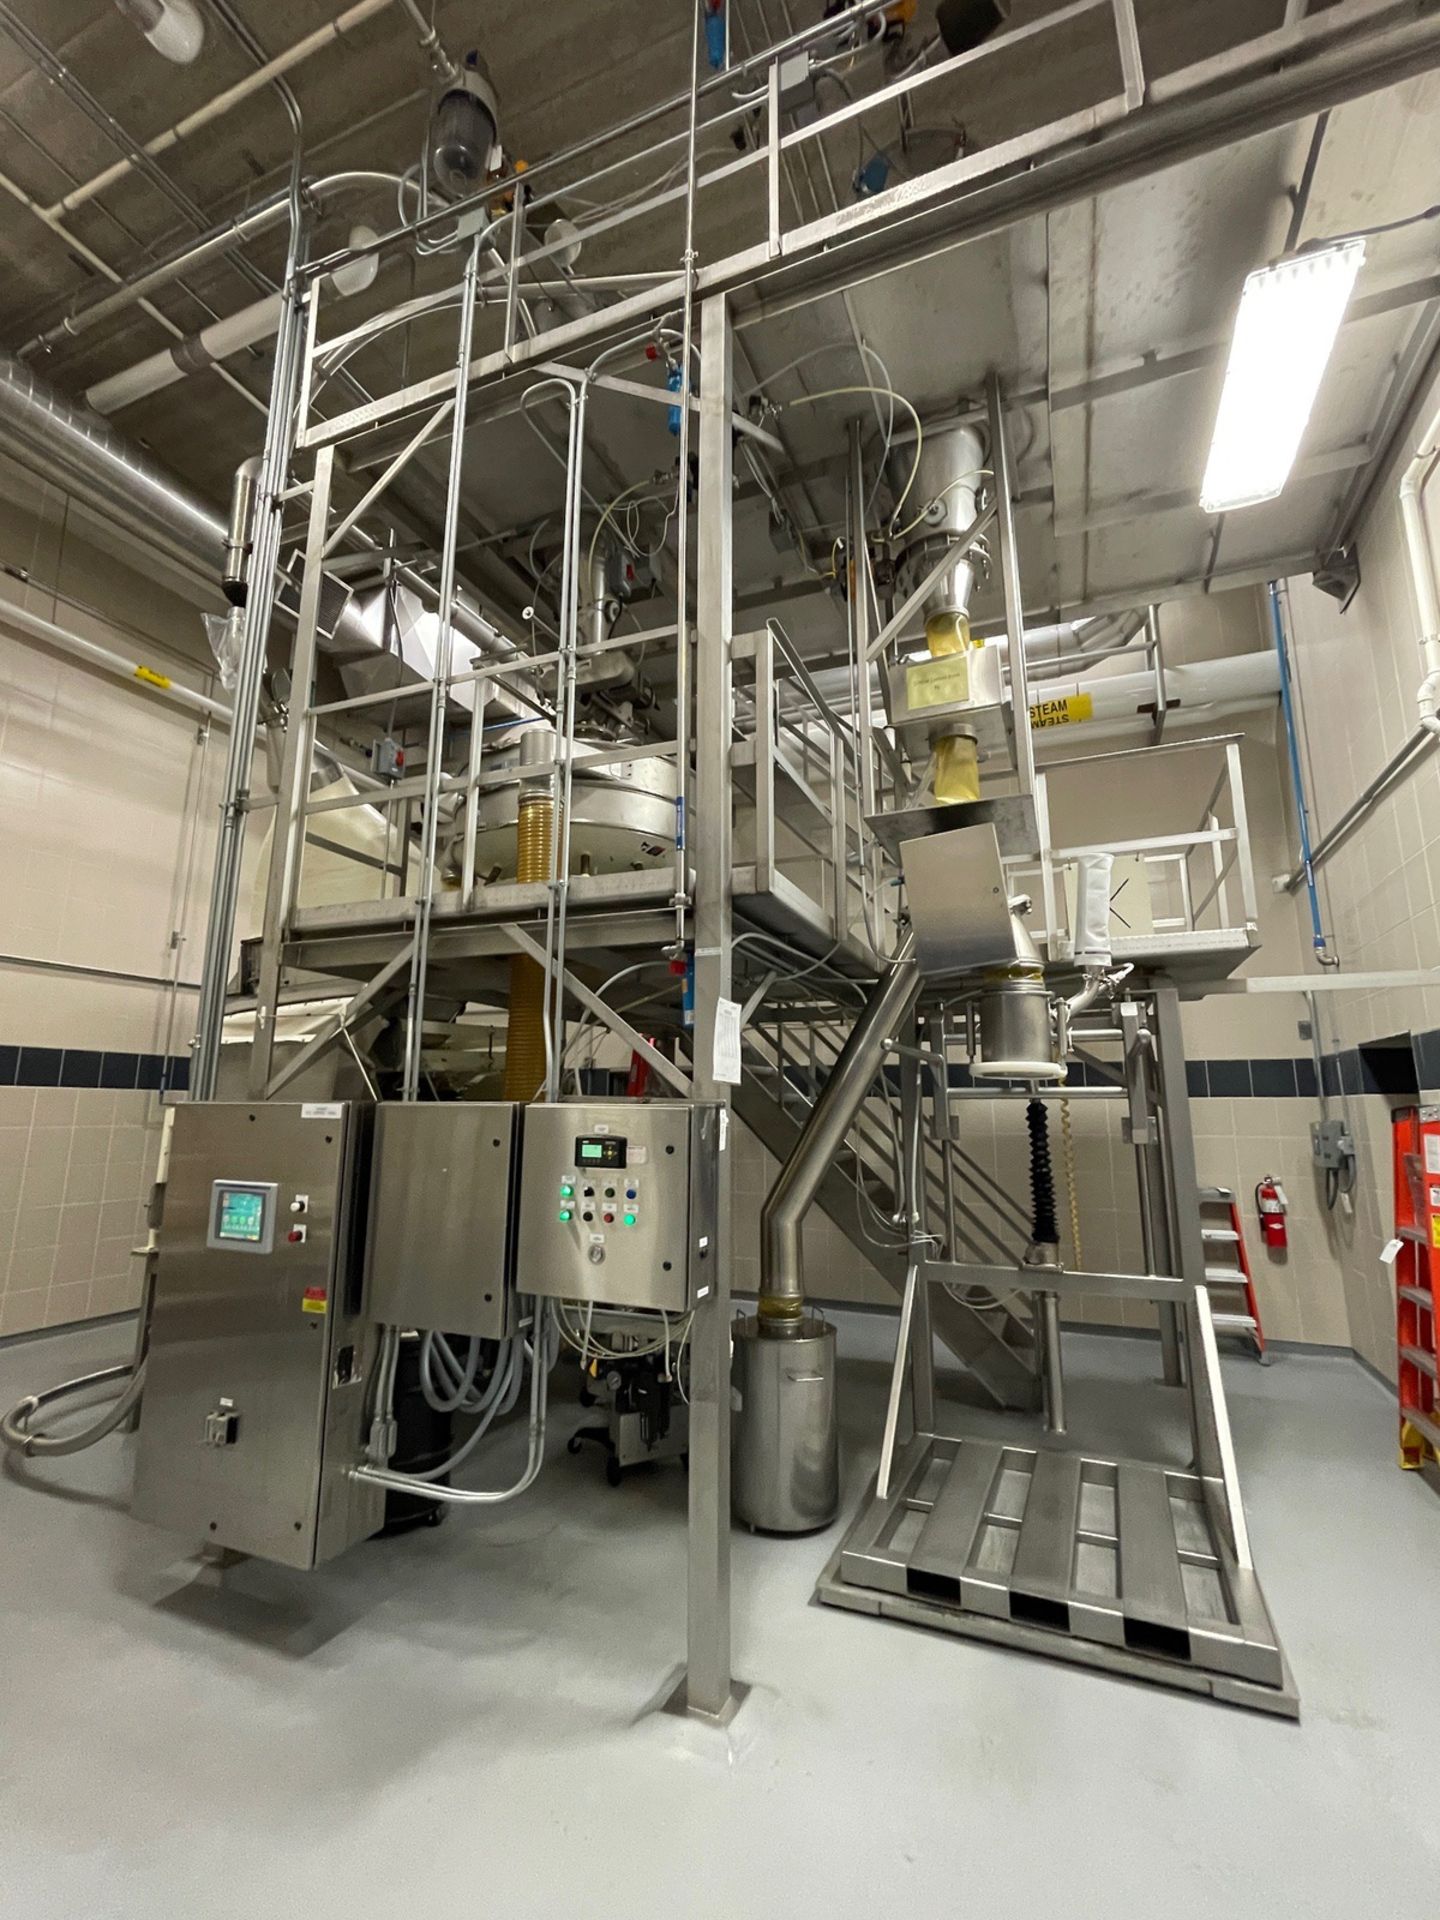 2013 PPS Super Sack Bulk Bag Filling System - Stainless Steel with Staircase; Mezza | Rig Fee $14000